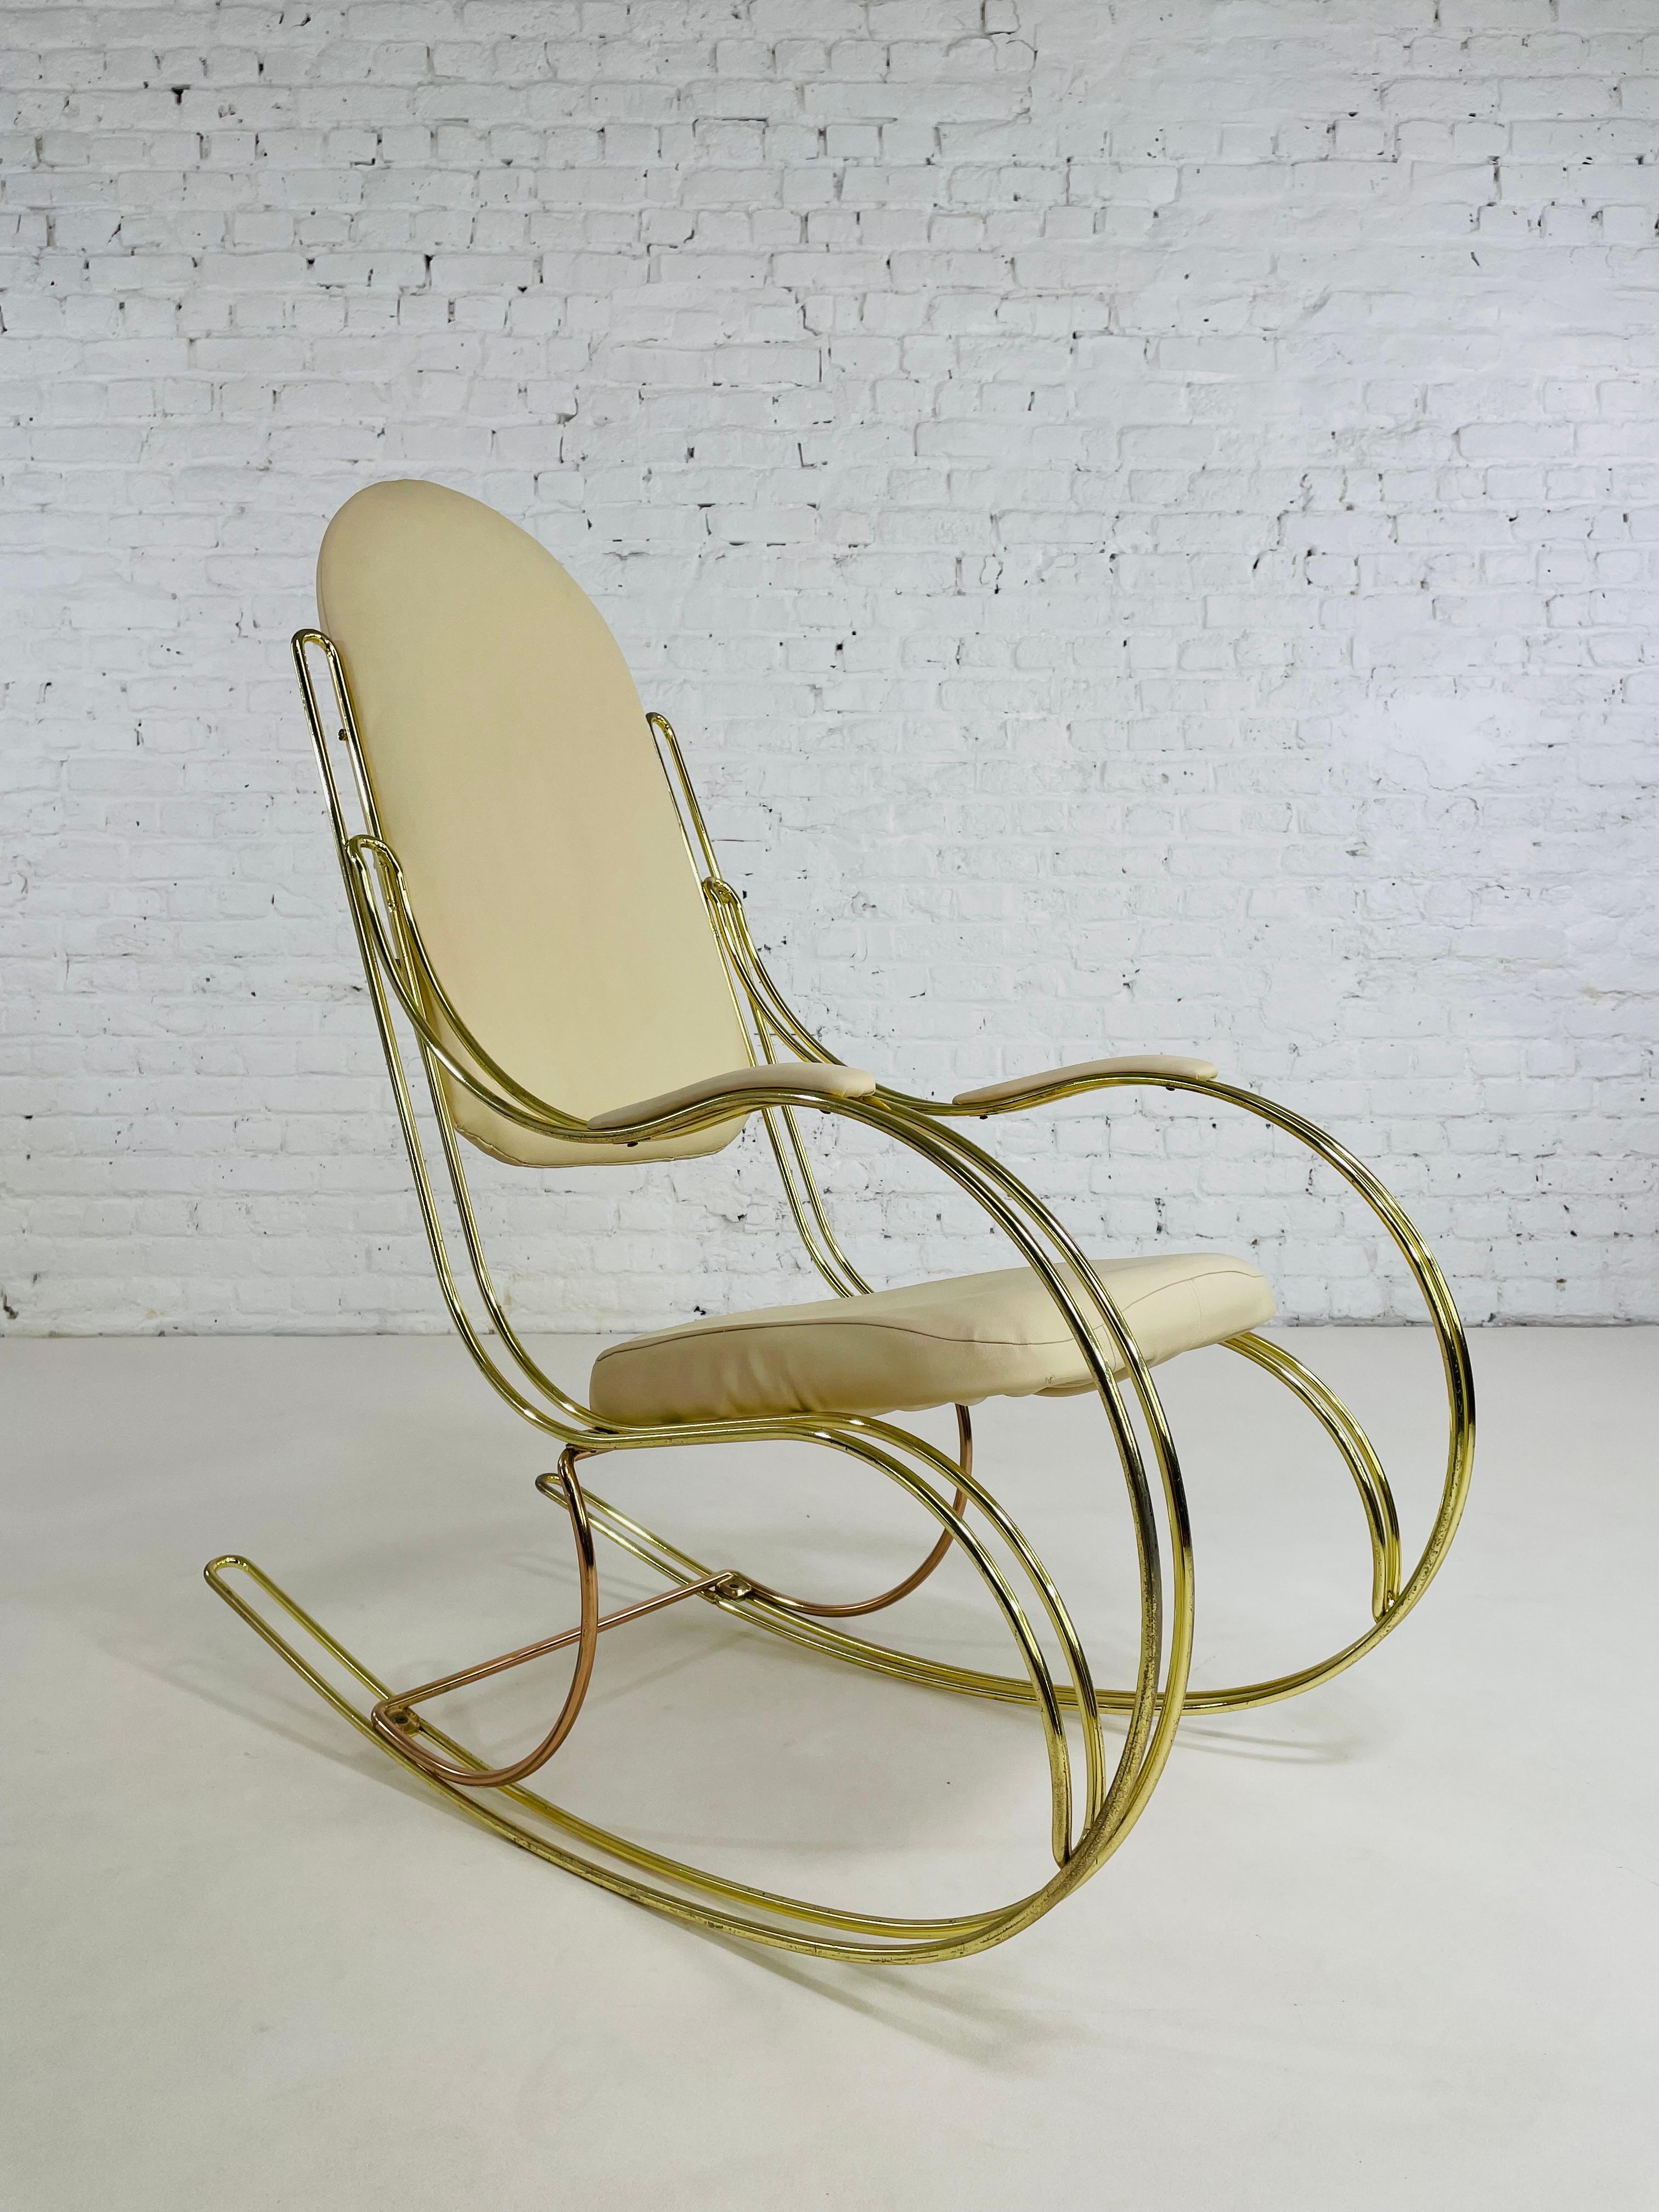 1960s - 1970s Brass And Beige faux leather rocking chair composed of a brass rounded and curved brass structure adorned with beige skaï back and seat.